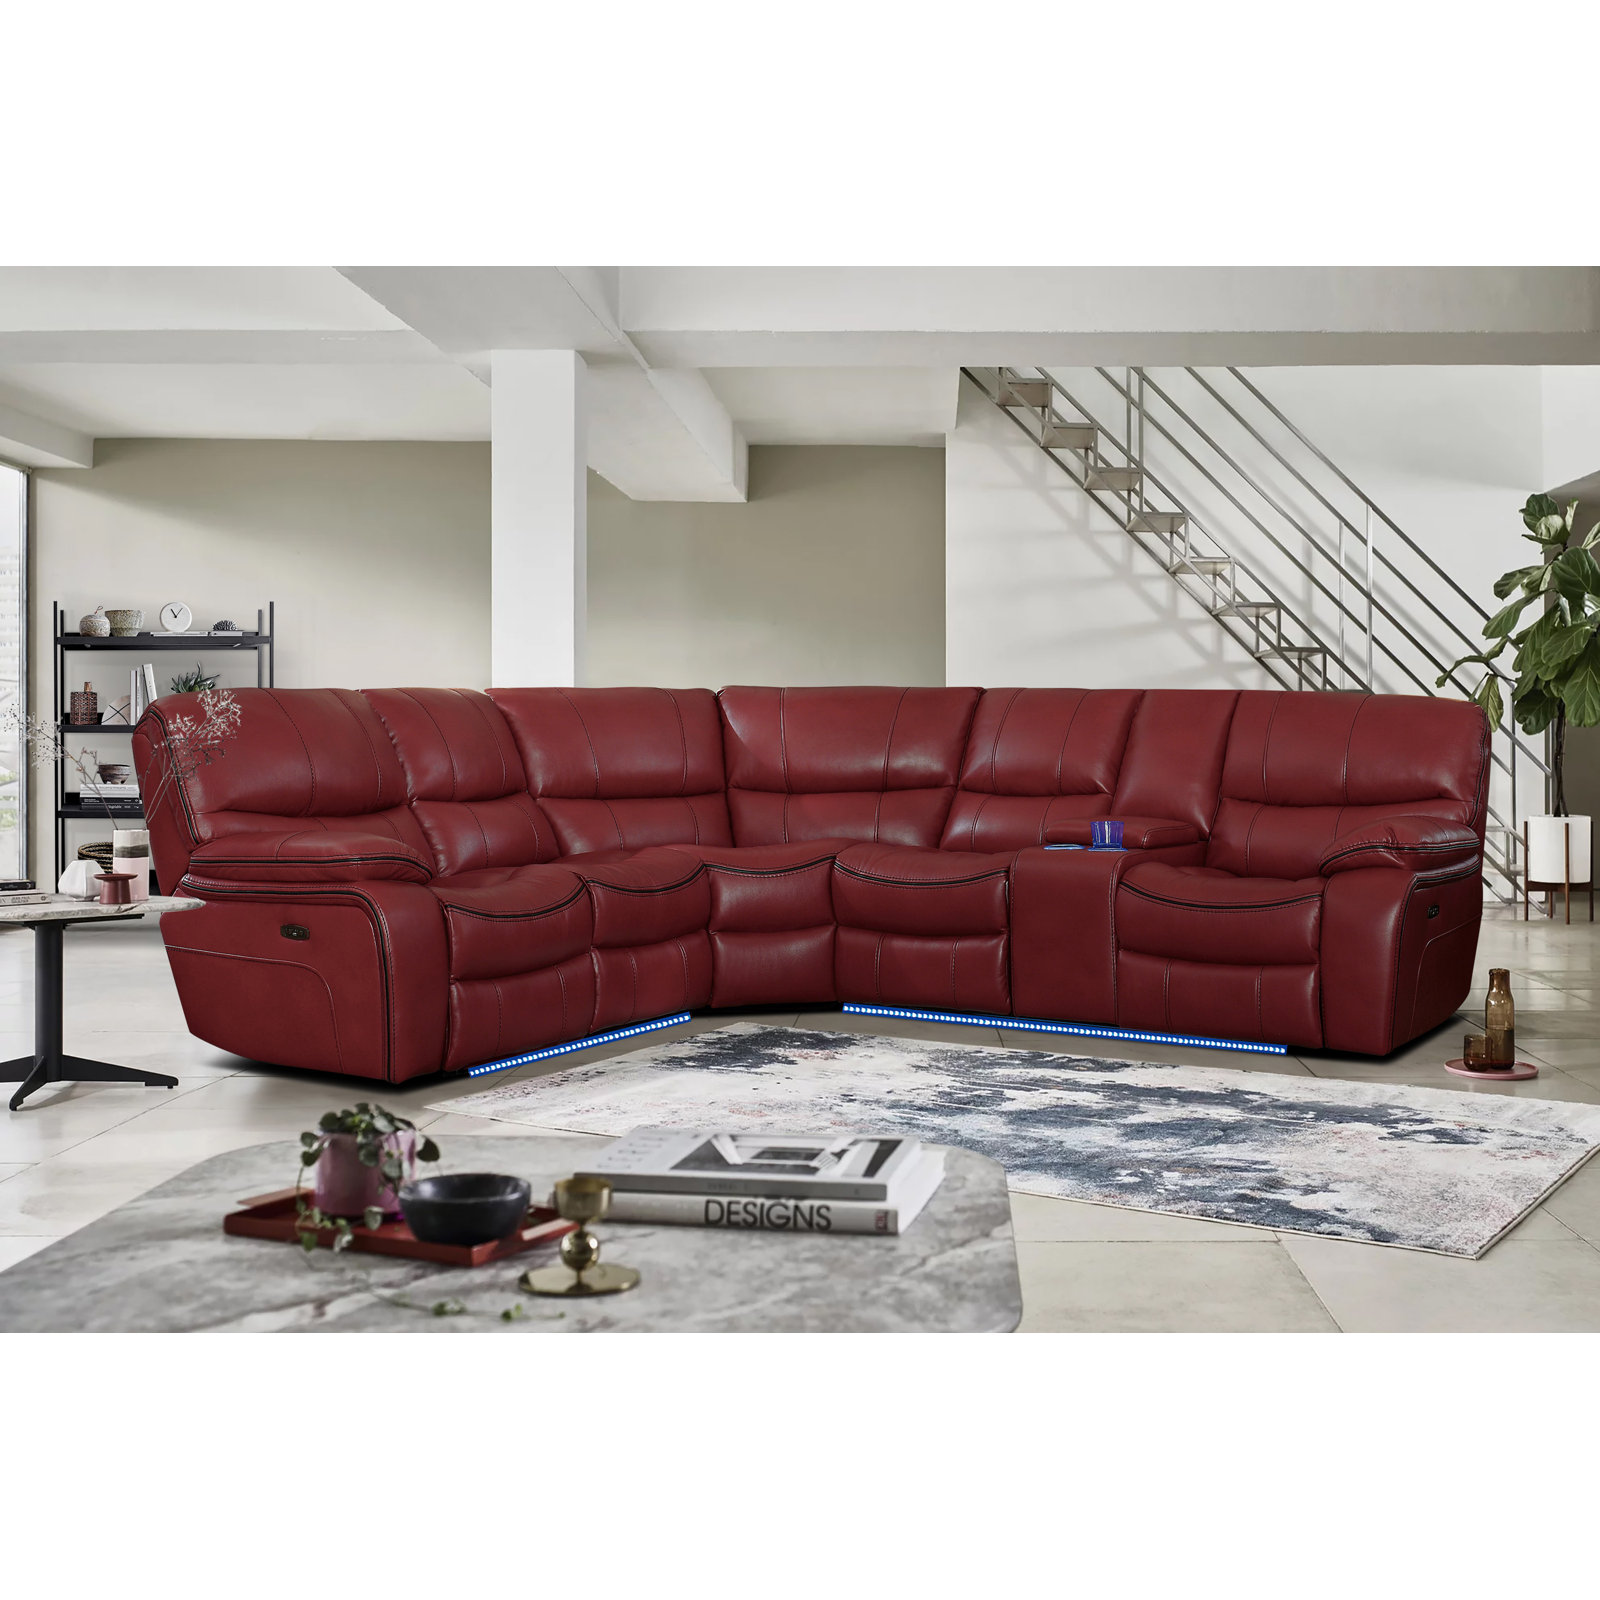 Lazzara Home 3 - Piece Vegan Leather Sectional